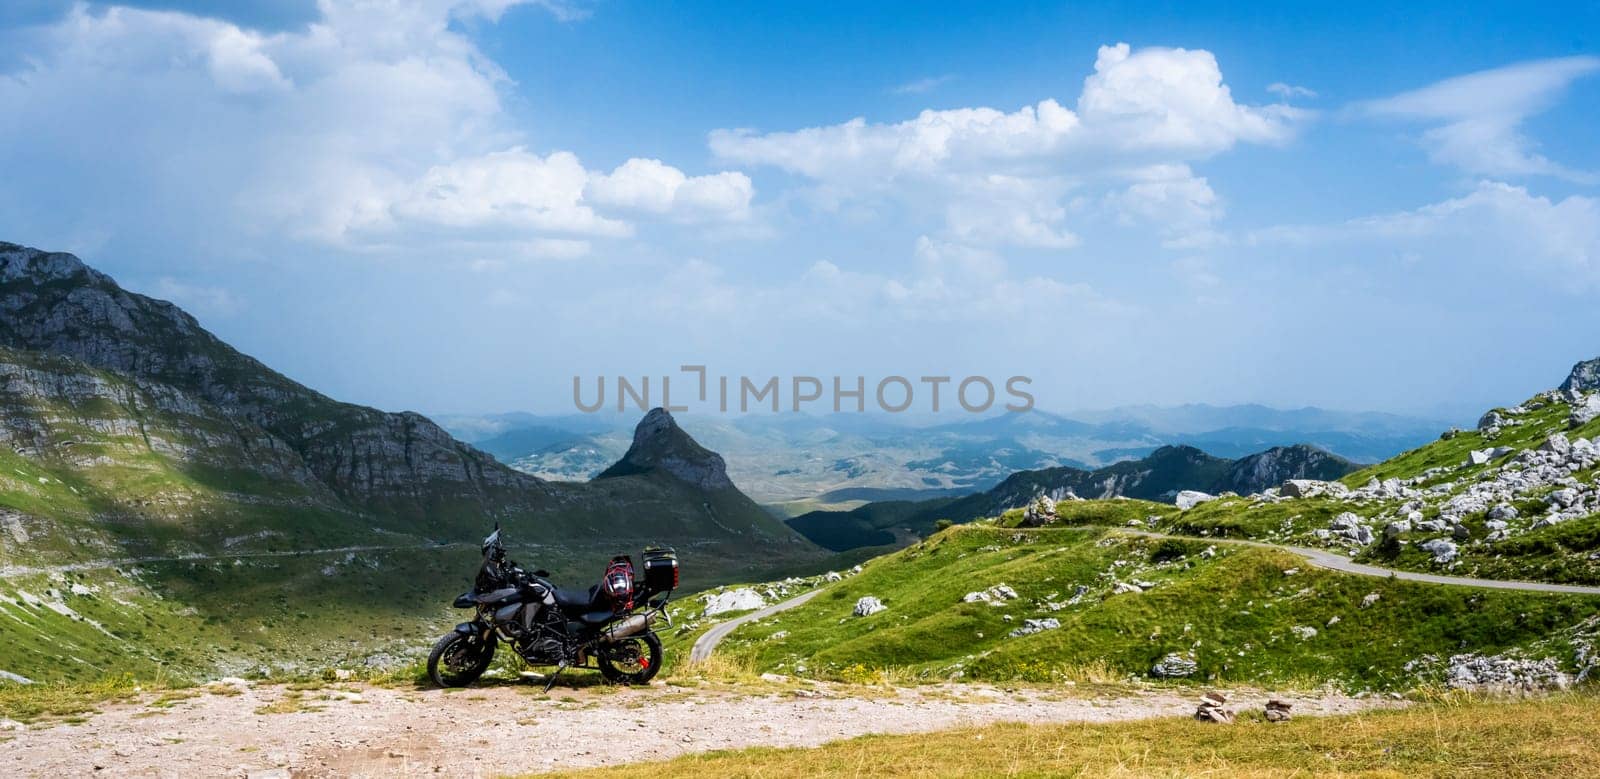 Motocycle in the mountains by GekaSkr